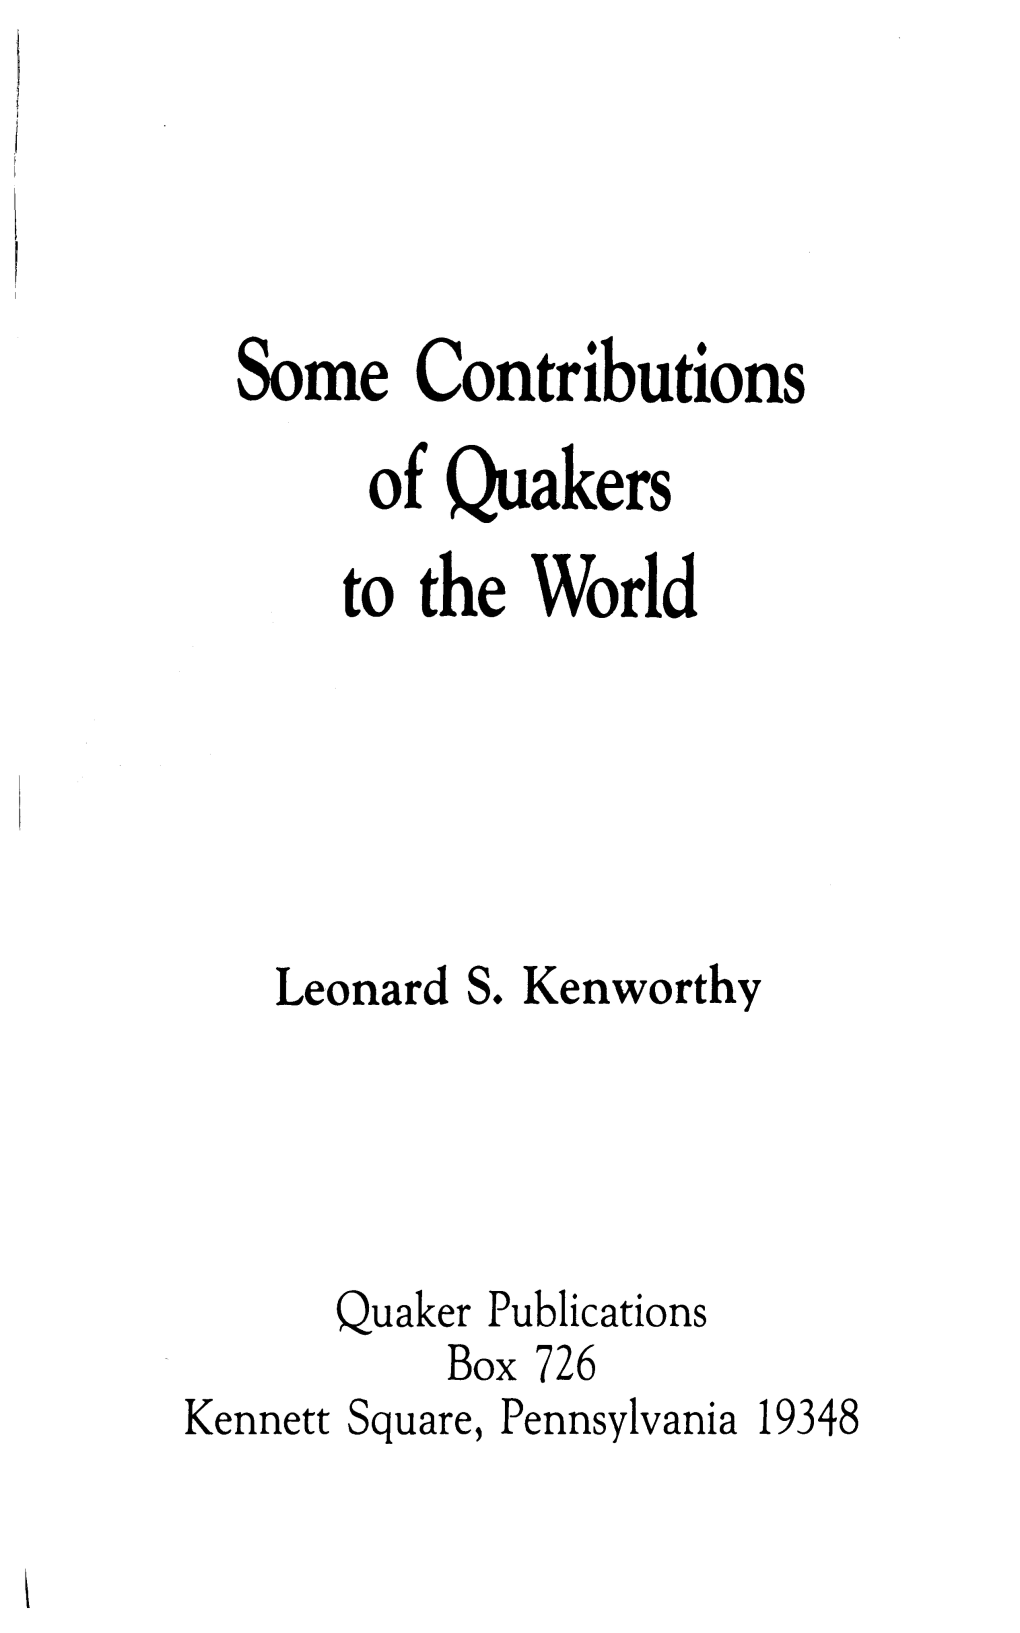 Some Contributions of Quakers to the World